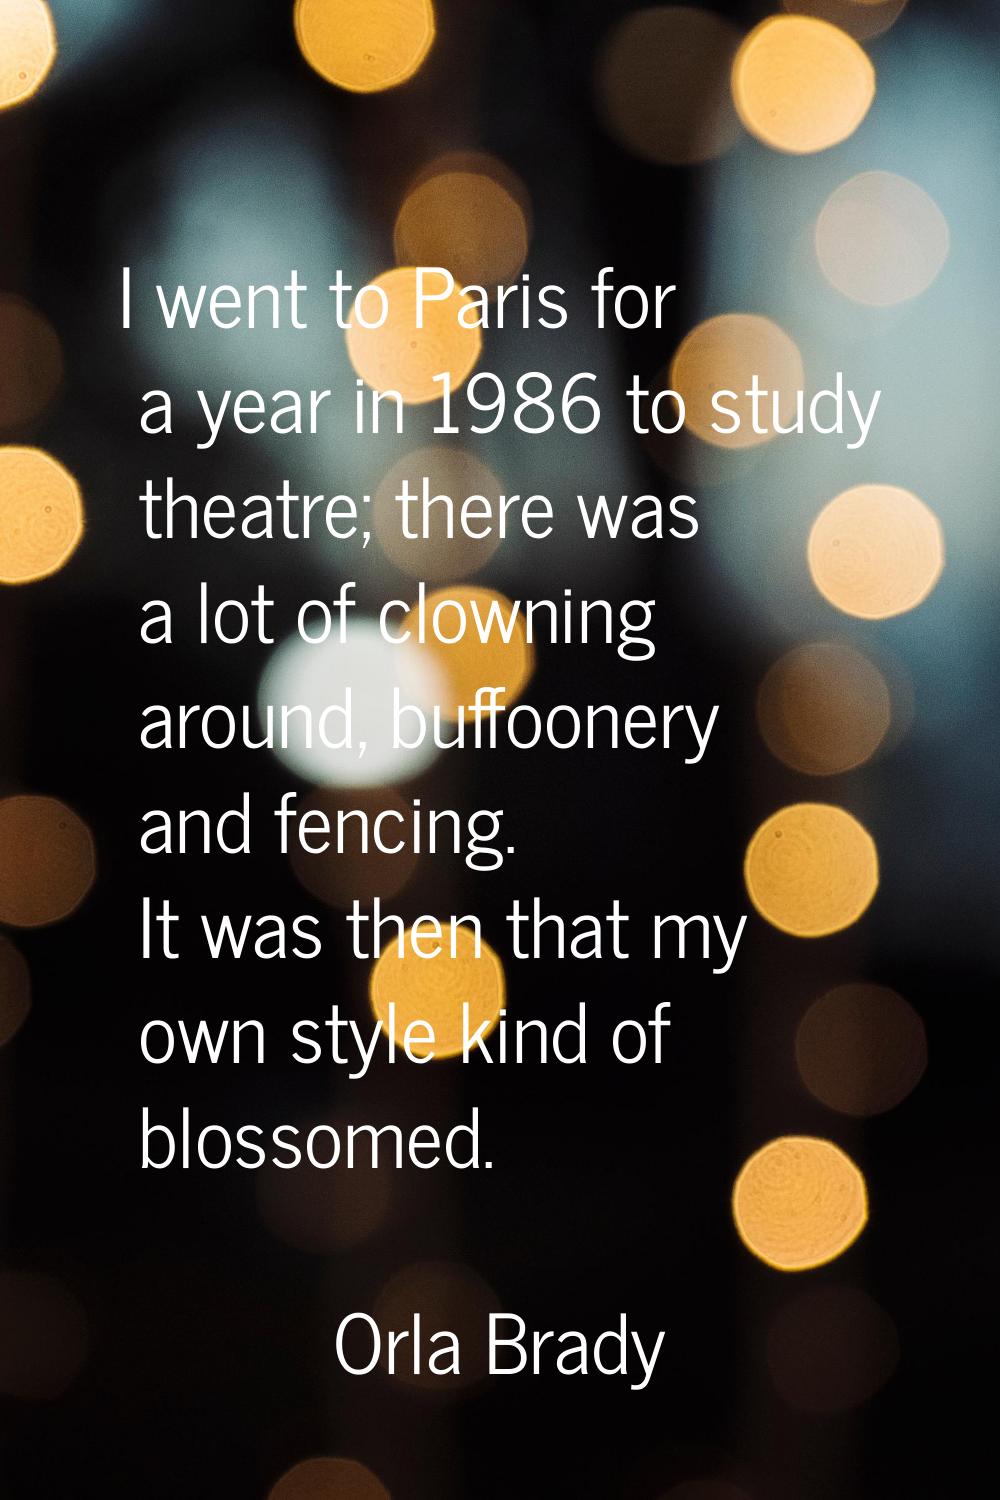 I went to Paris for a year in 1986 to study theatre; there was a lot of clowning around, buffoonery